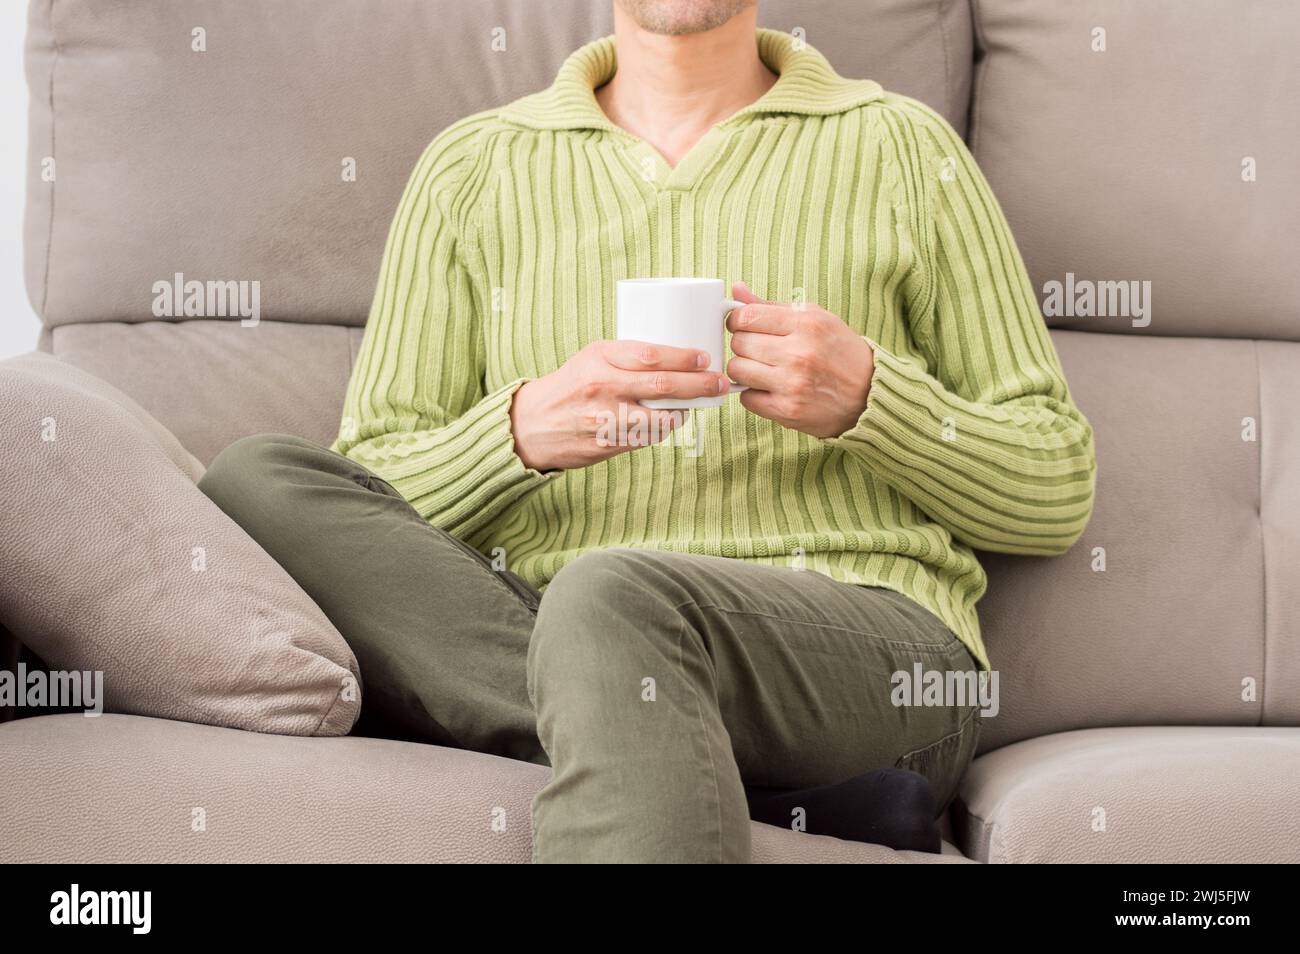 Front view of a legs of a man holding a cup of coffee in winter sitting on a couch in the living room at home Stock Photo